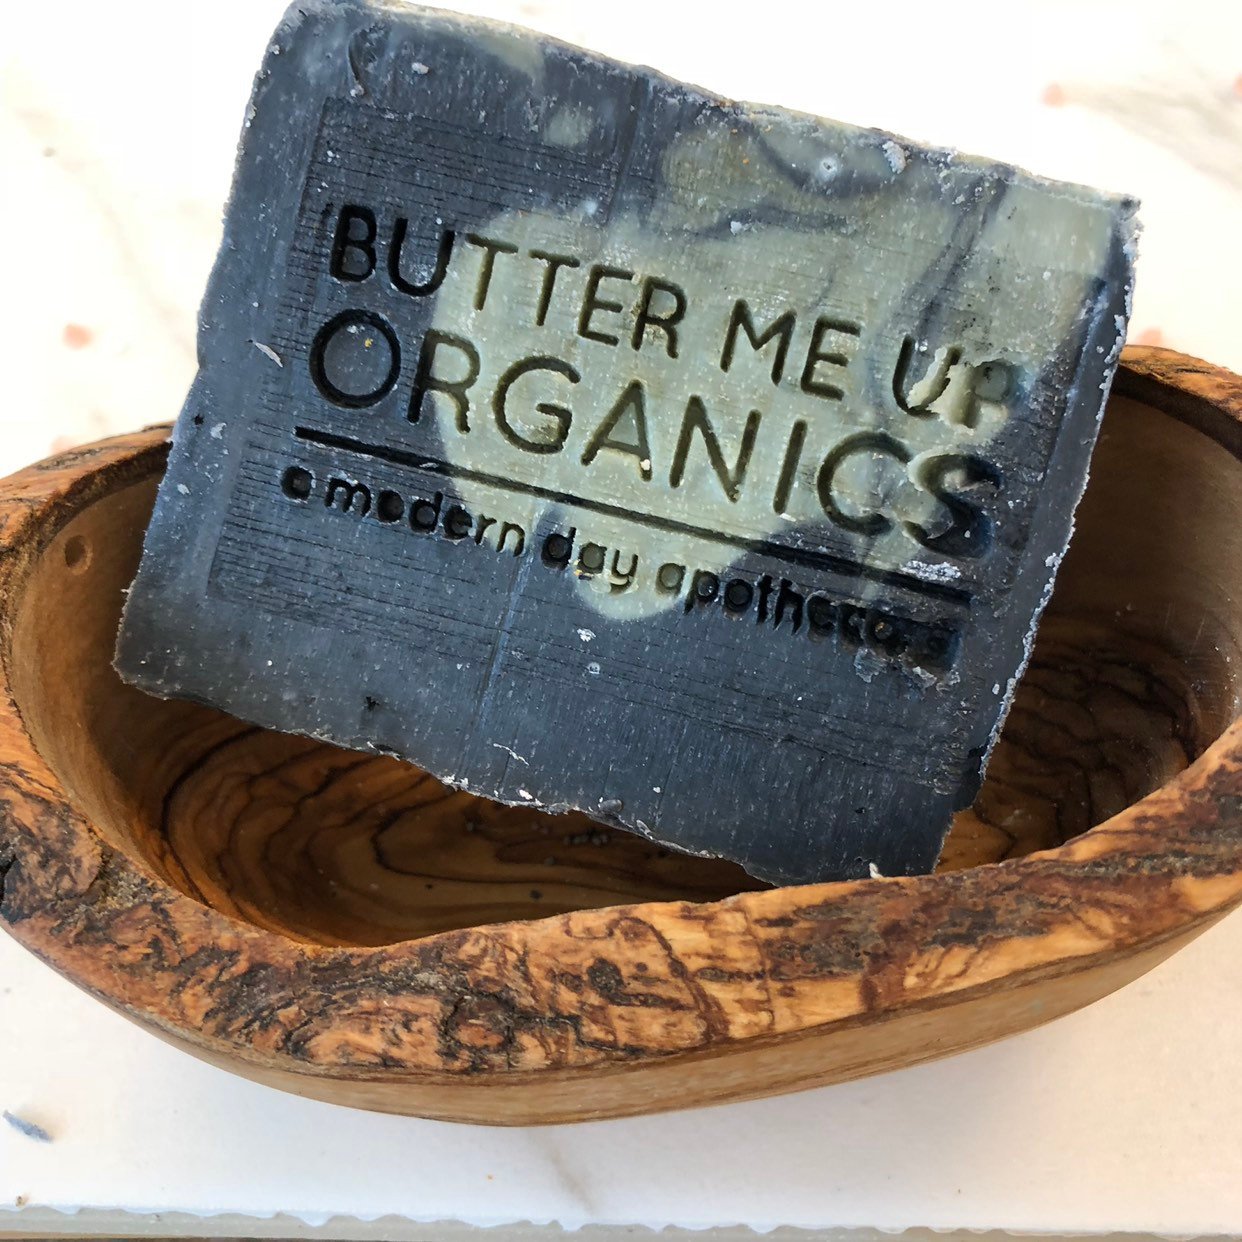 BUTTER ME UP ORGANICS Bar Soap / Lemongrass Mint Activated Charcoal French Green Clay